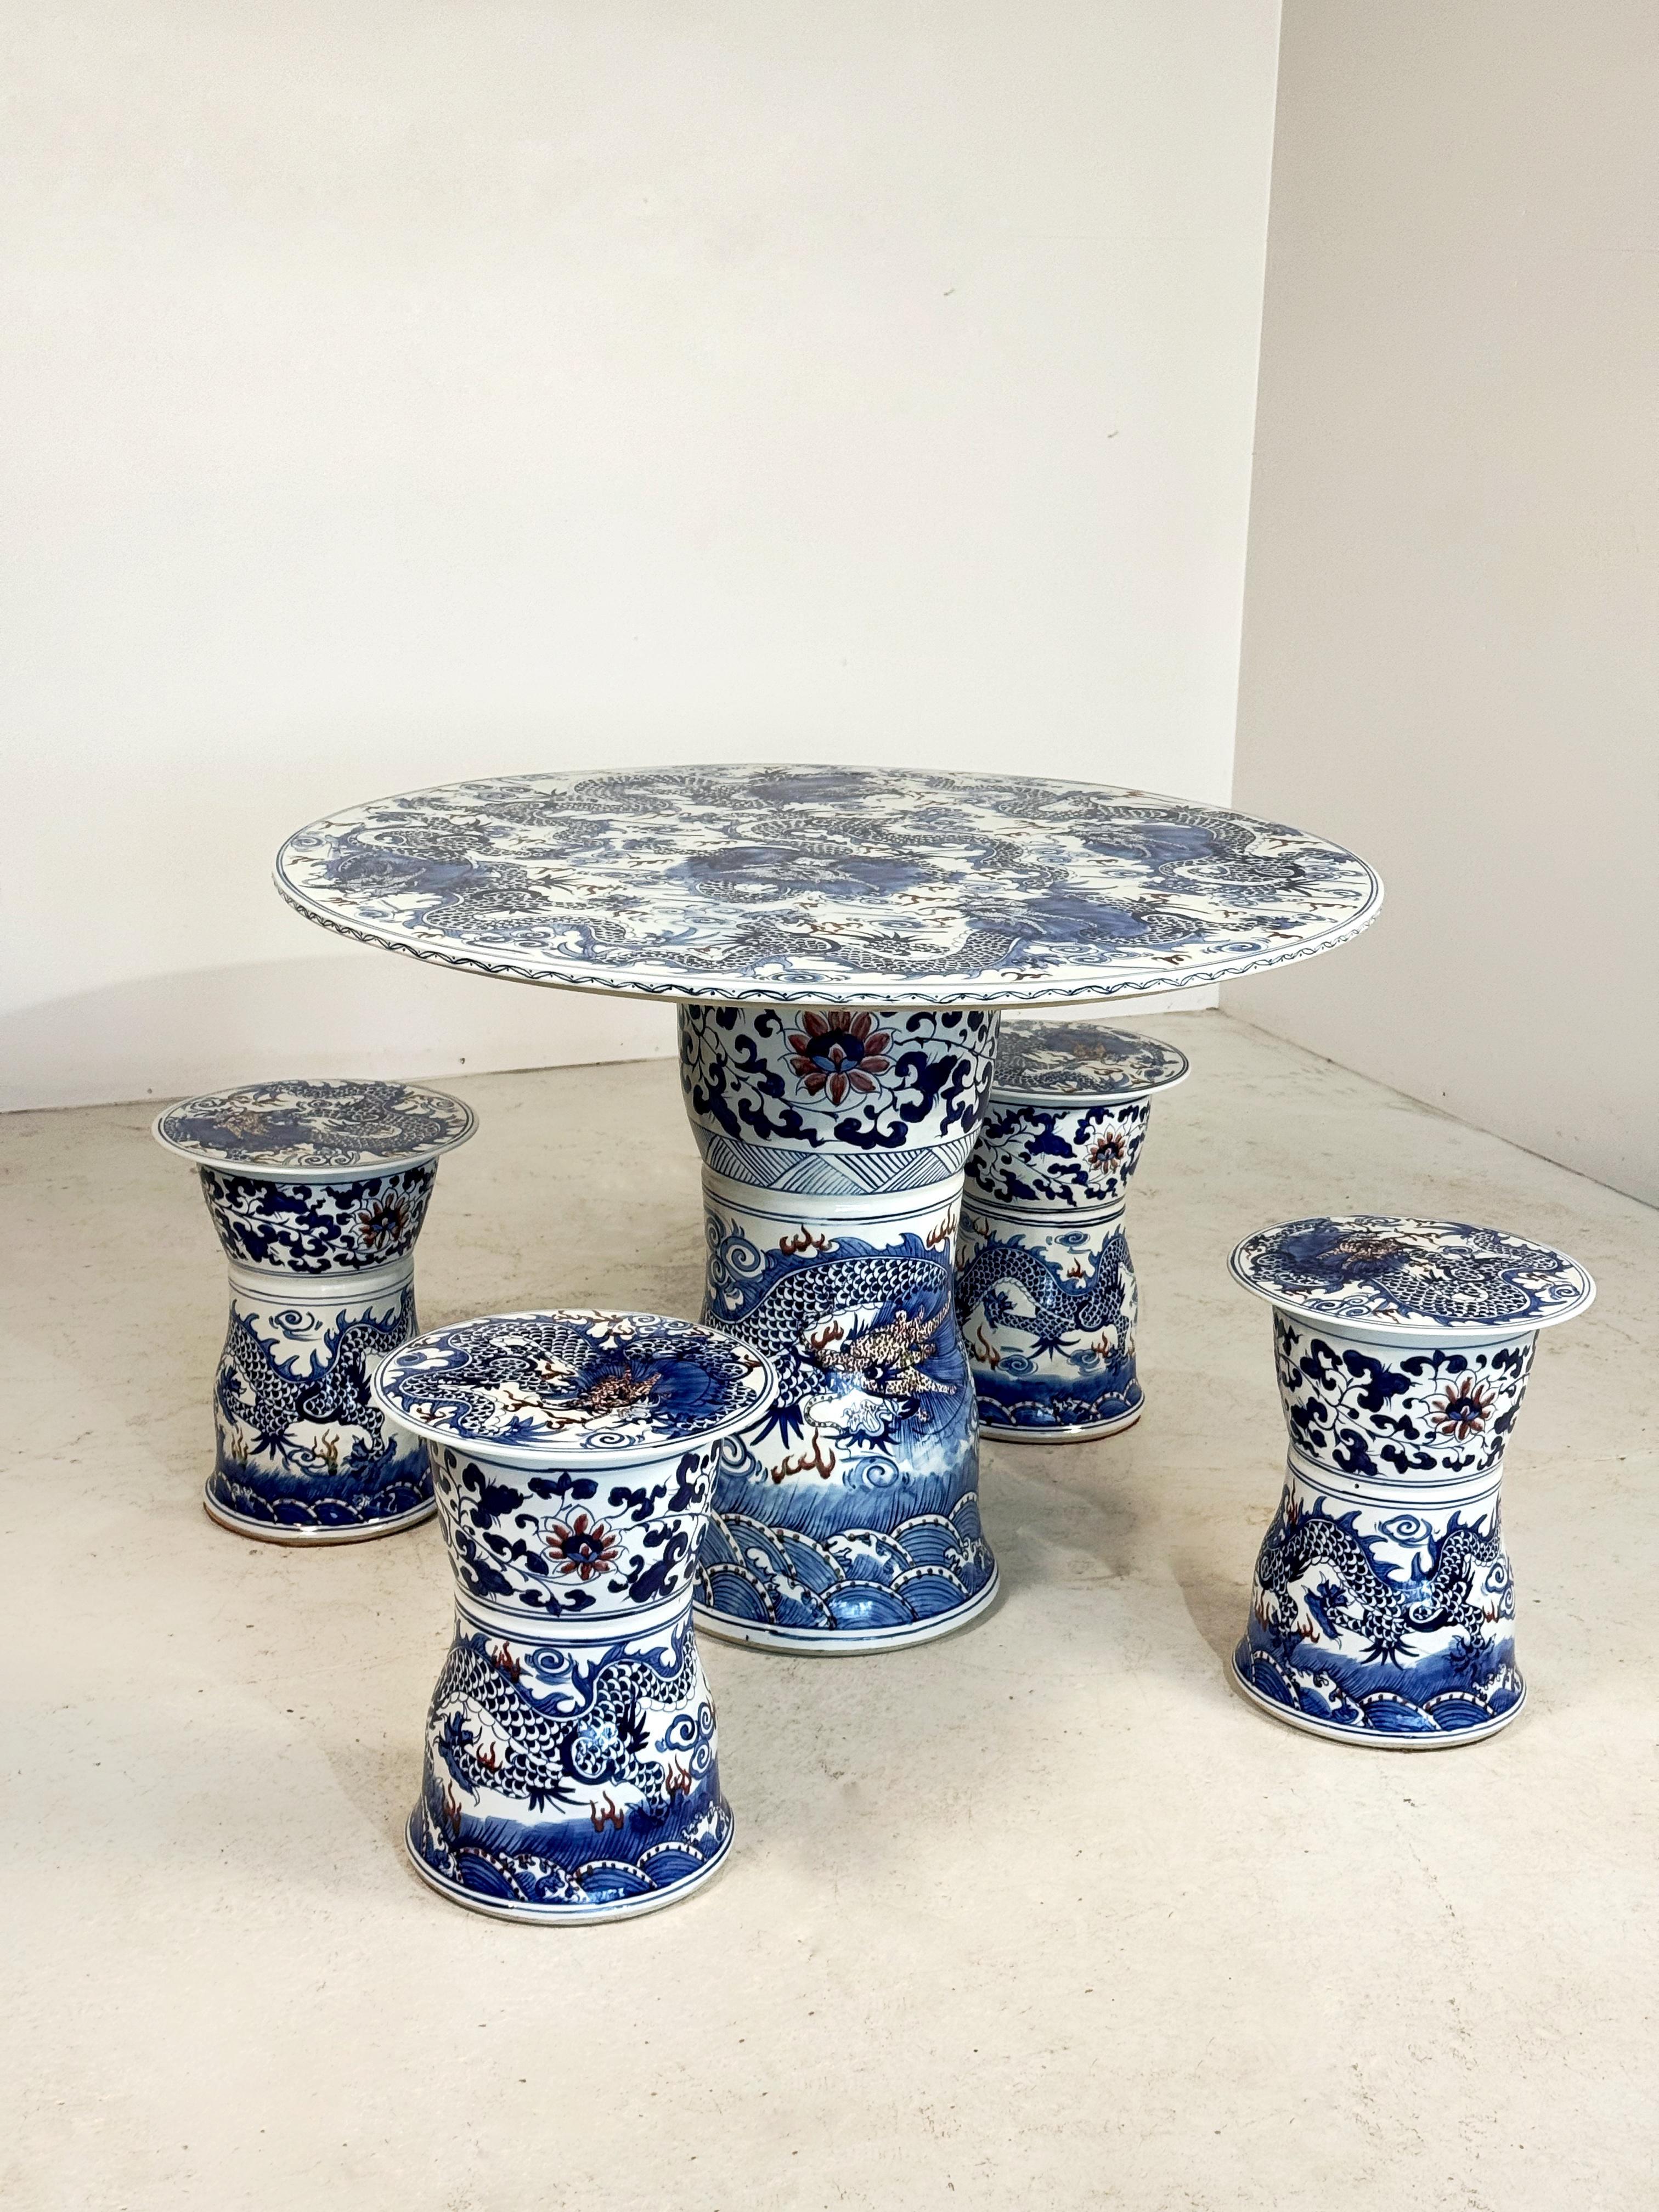 Absolute marvelous Chinese Ceramic Table Set in very good condition.

Set contains 1 table and 4 stools, all in bleu and red dragon figures.

1 stool has a little chip, as you can see on the pictures.

Tabletop in perfect condition.

We also can